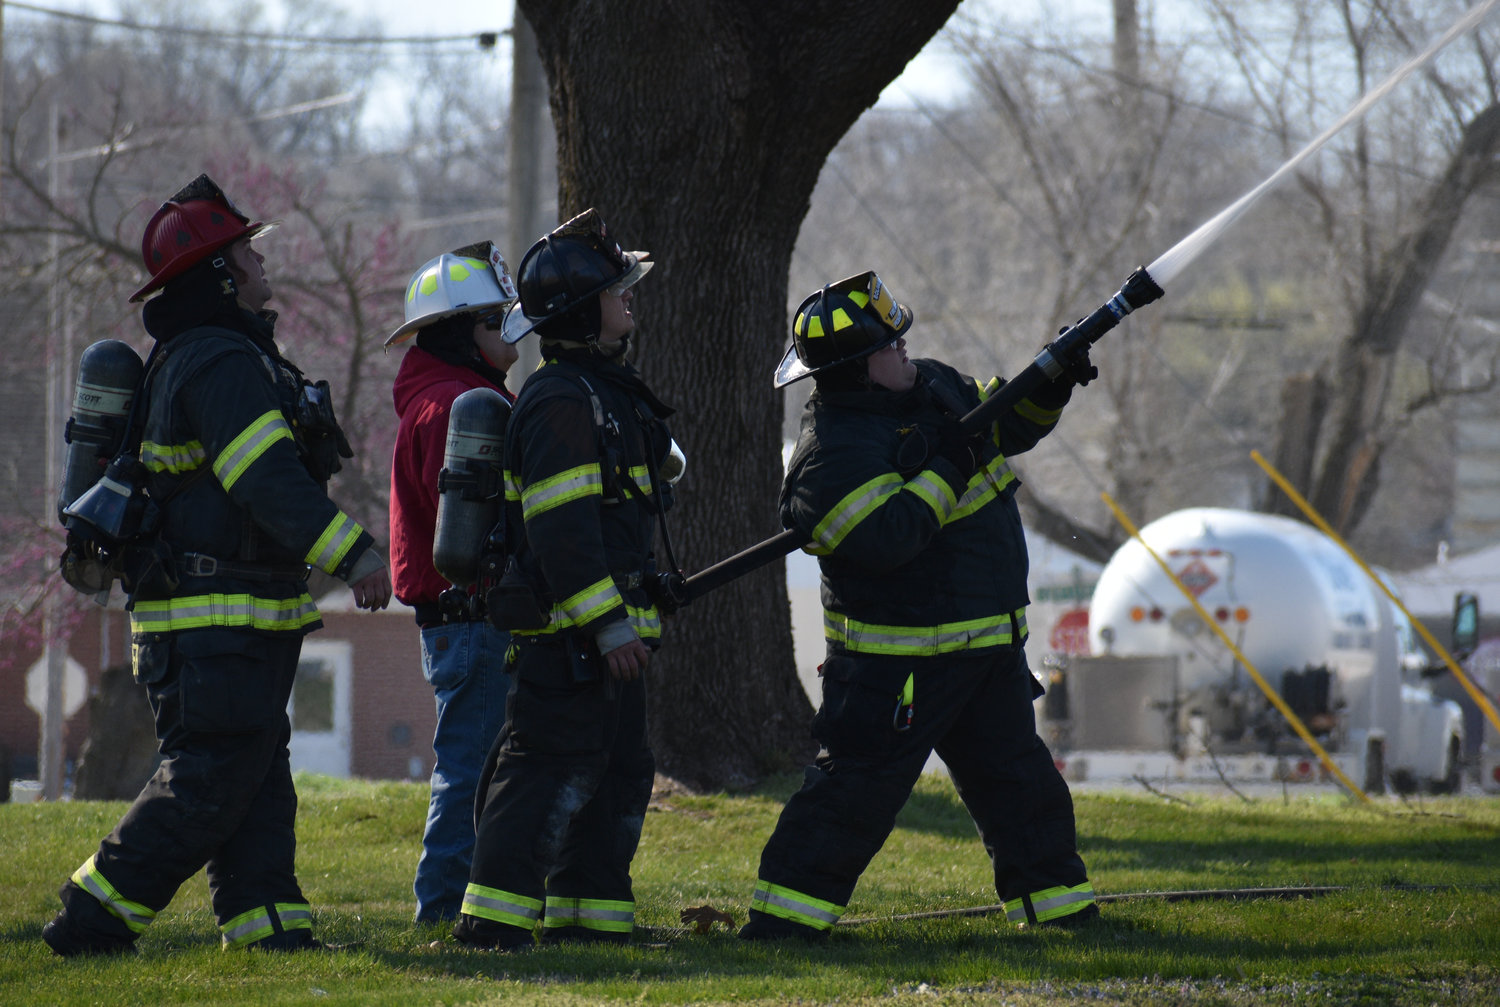 Standing in the house’s east lawn, Bolivar City firefighter Tommy Gerean, with the help of Bolivar Capt. Jeremiah Archer, Morrisville Fire Protection District Chief Ken Witt and Bolivar firefighter Caleb Dunaway, sprays water on the house to help control the fire.